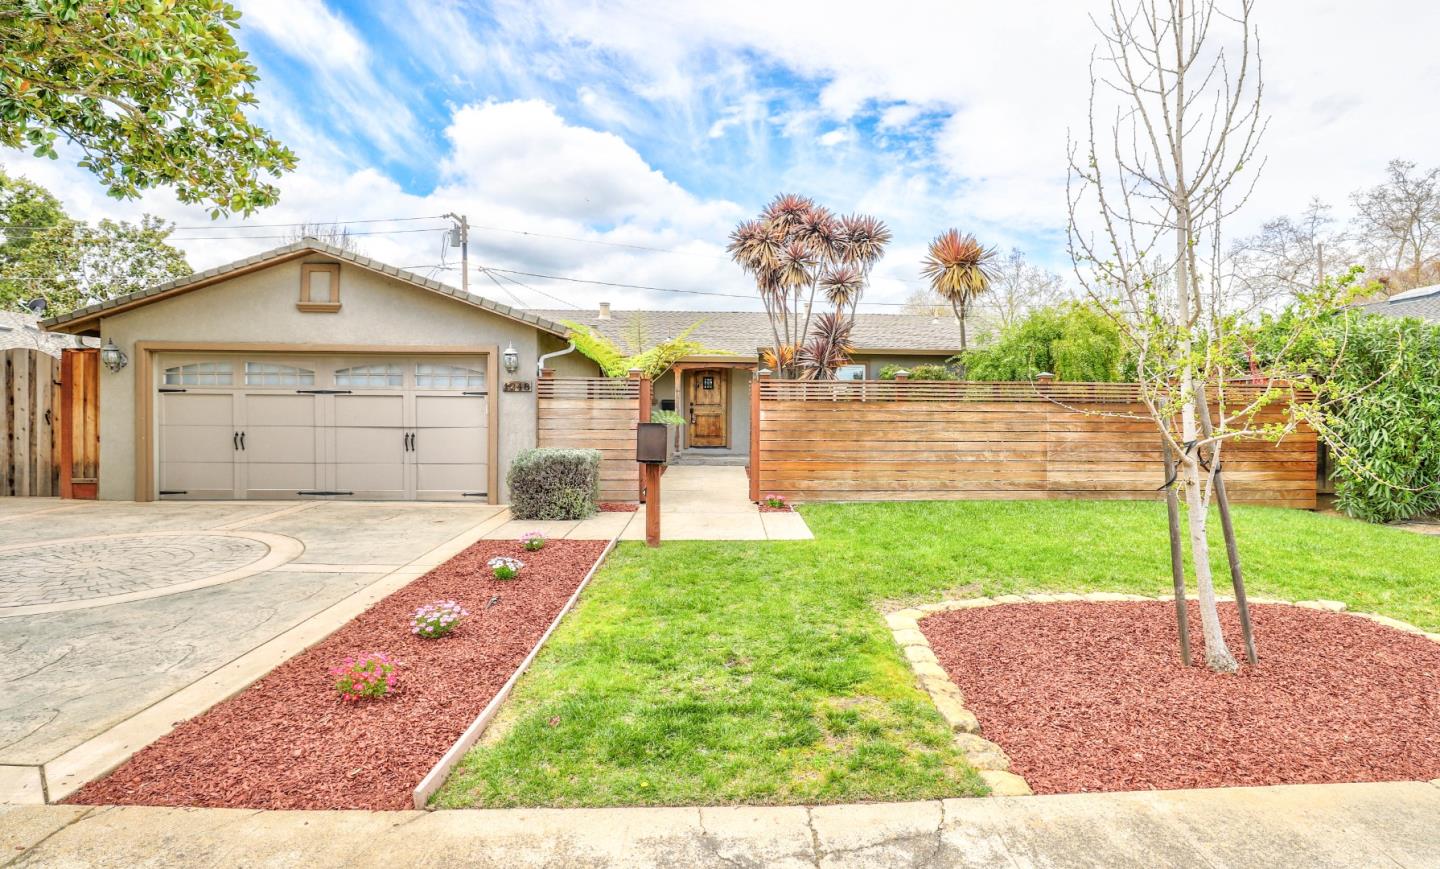 Photo of 1248 Phyllis Ave in Mountain View, CA